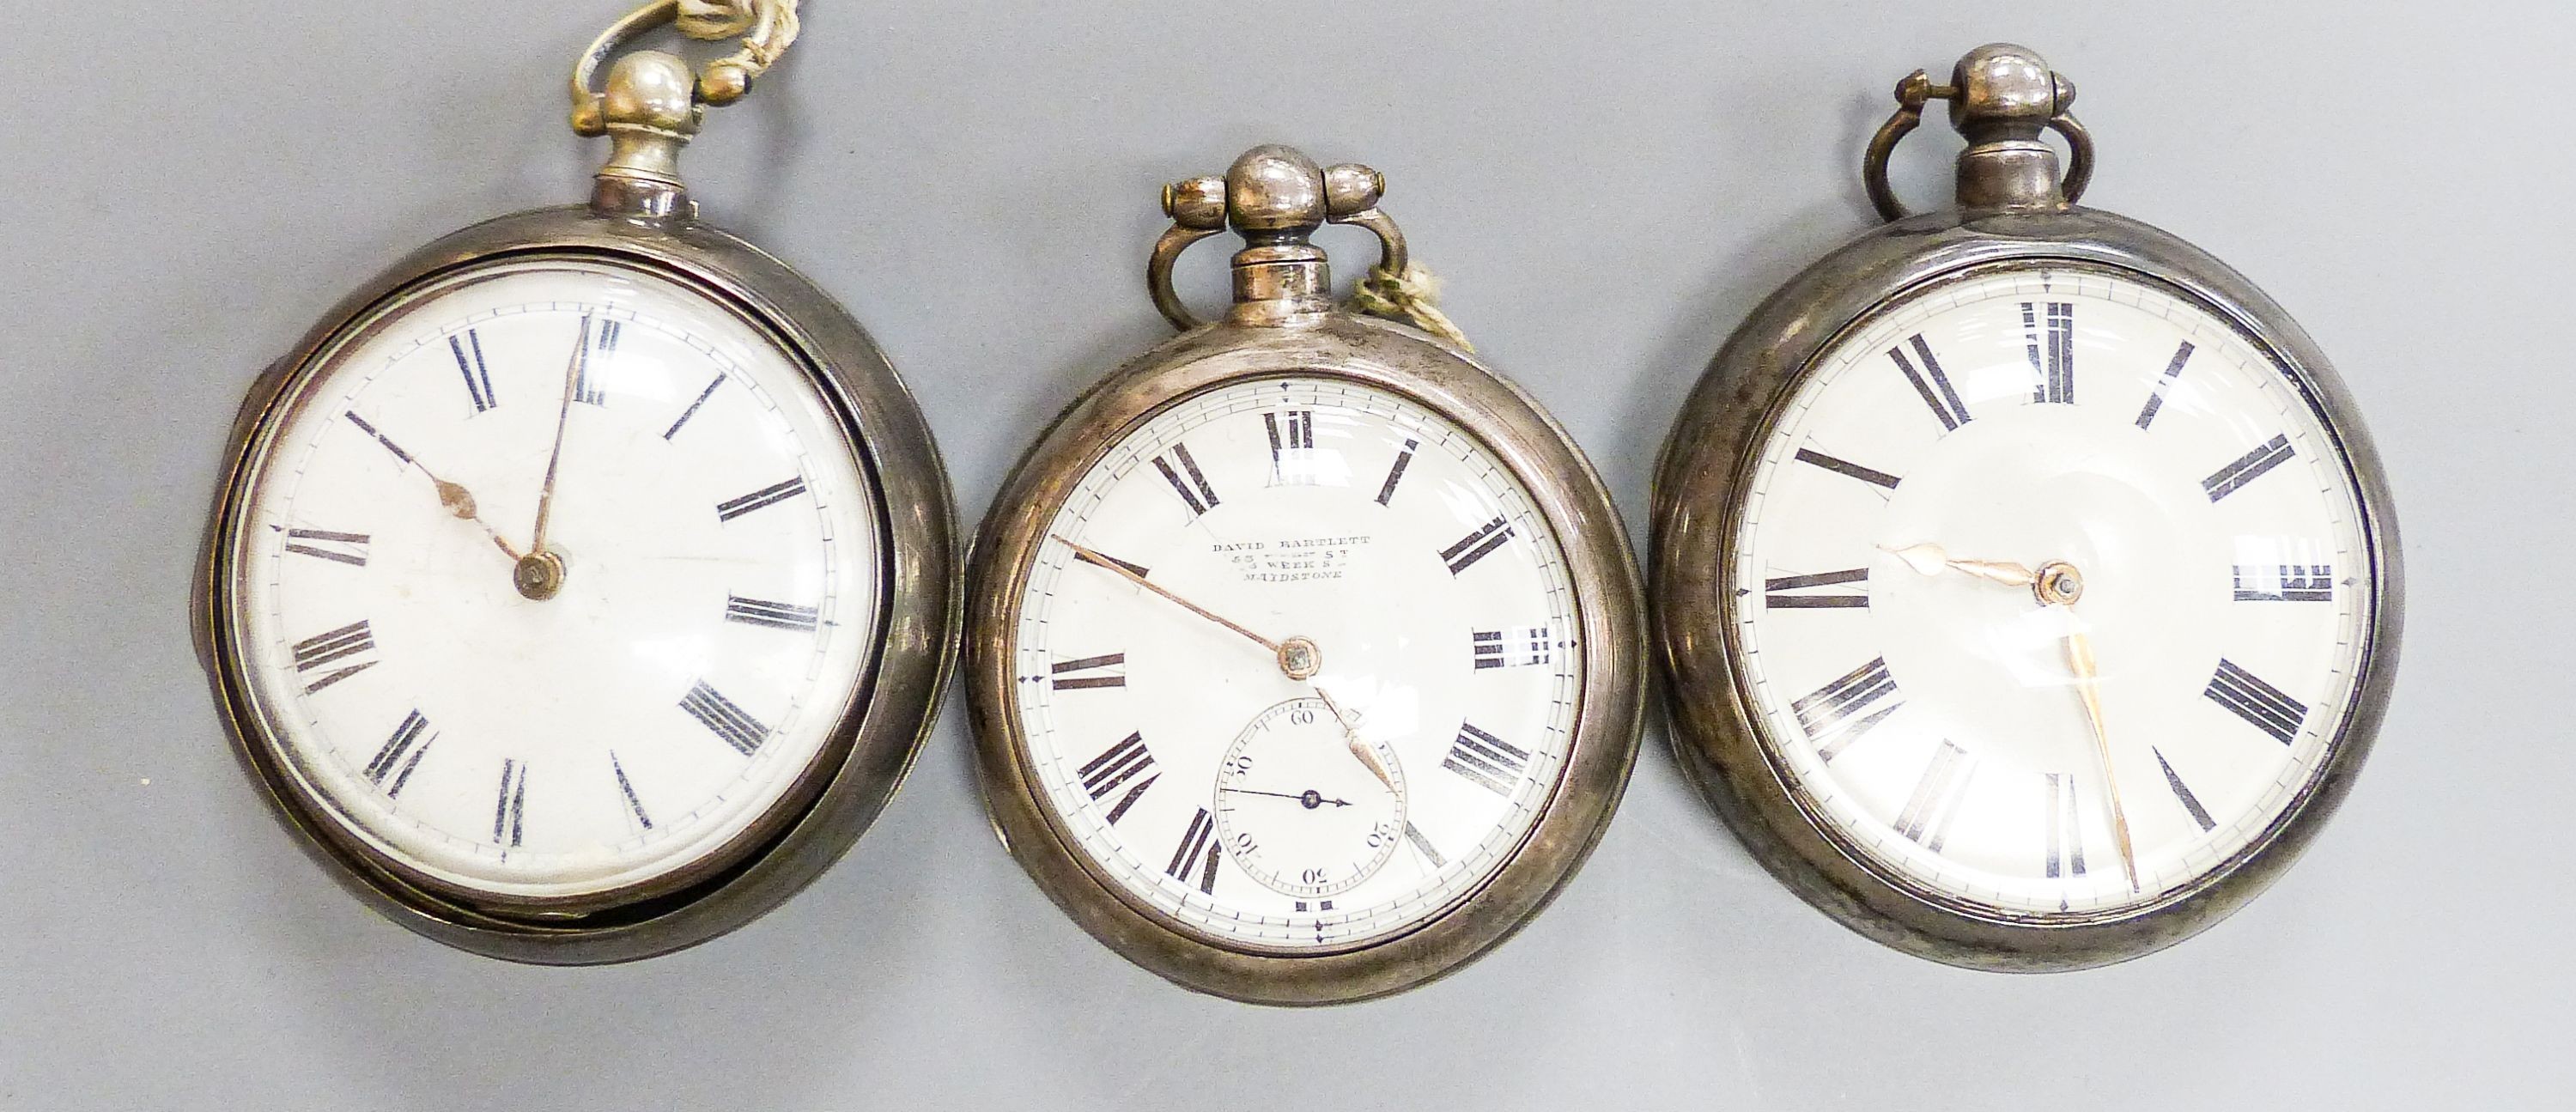 Three 18th/19th century silver pair cased keywind verge pocket watches, including Newland, London.